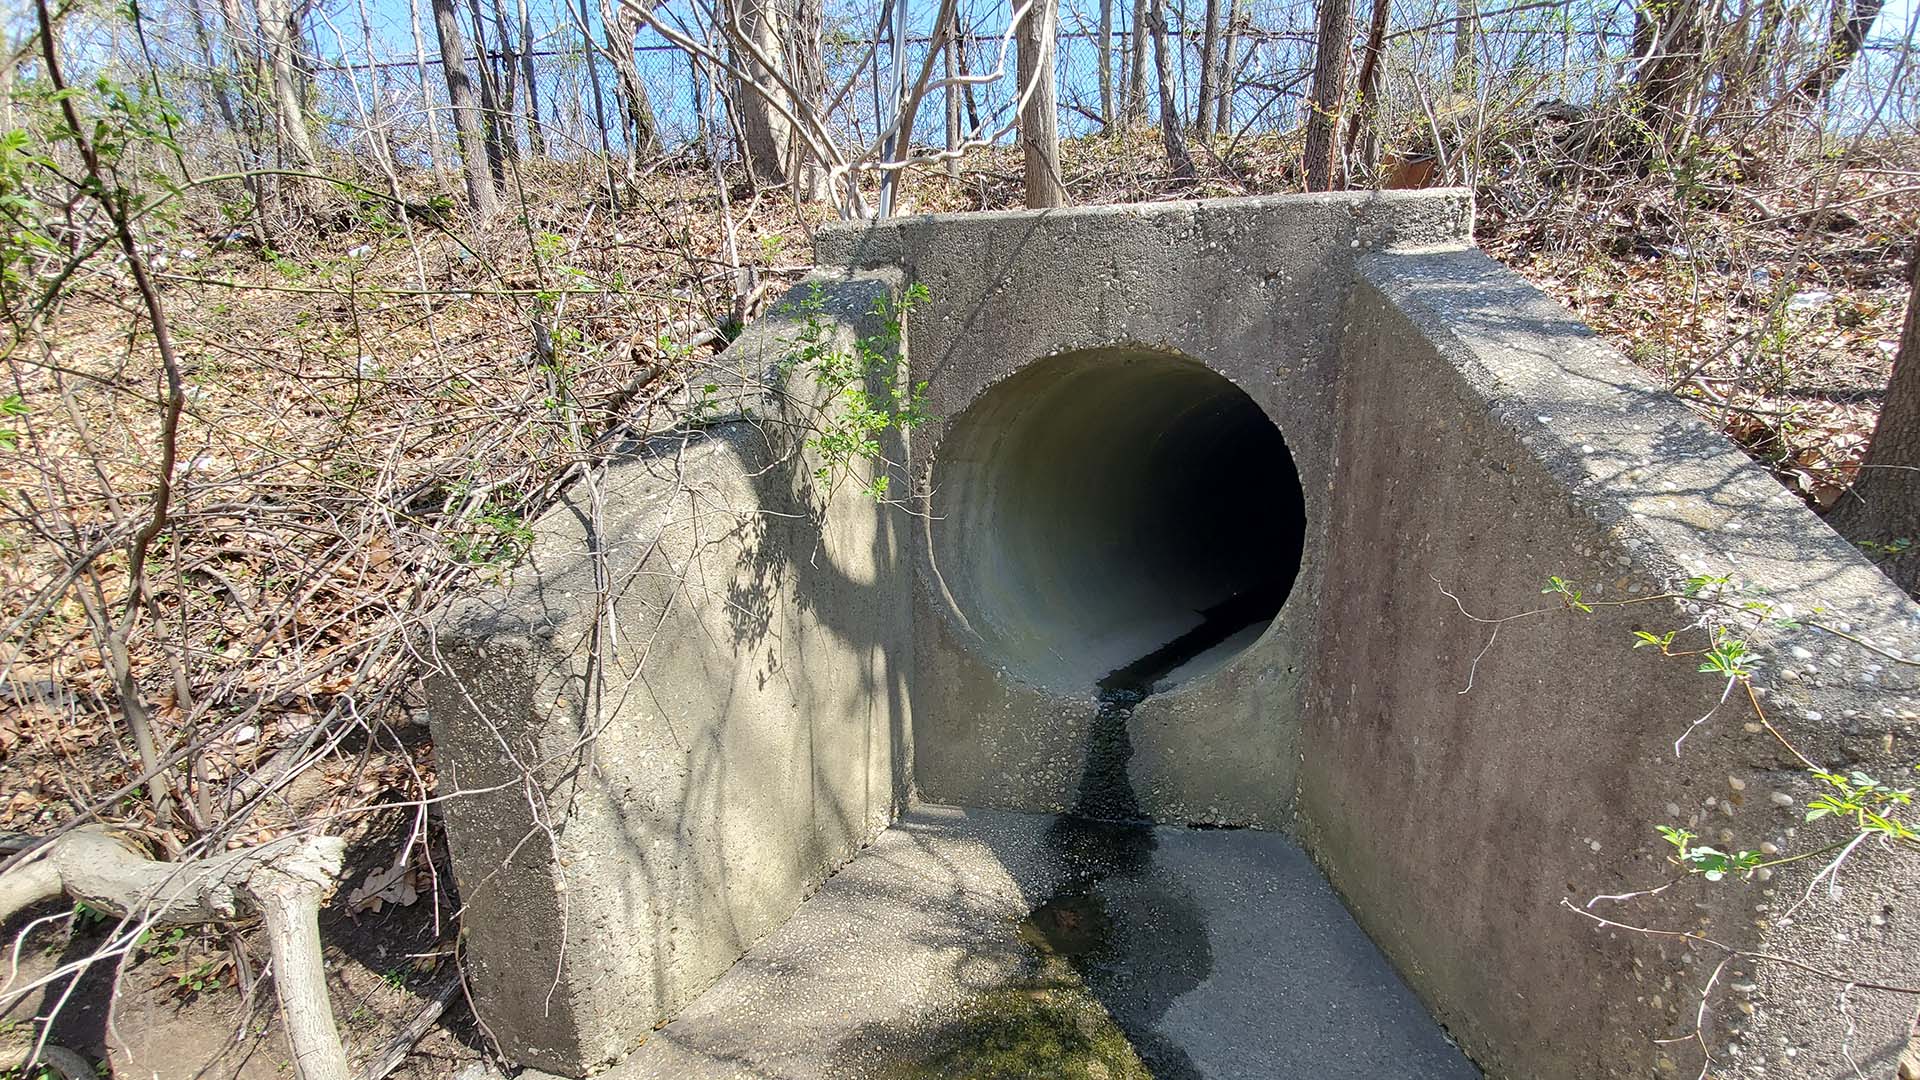 SUNY at Stony Brook Stormwater and Sanitary Sewer Evaluations